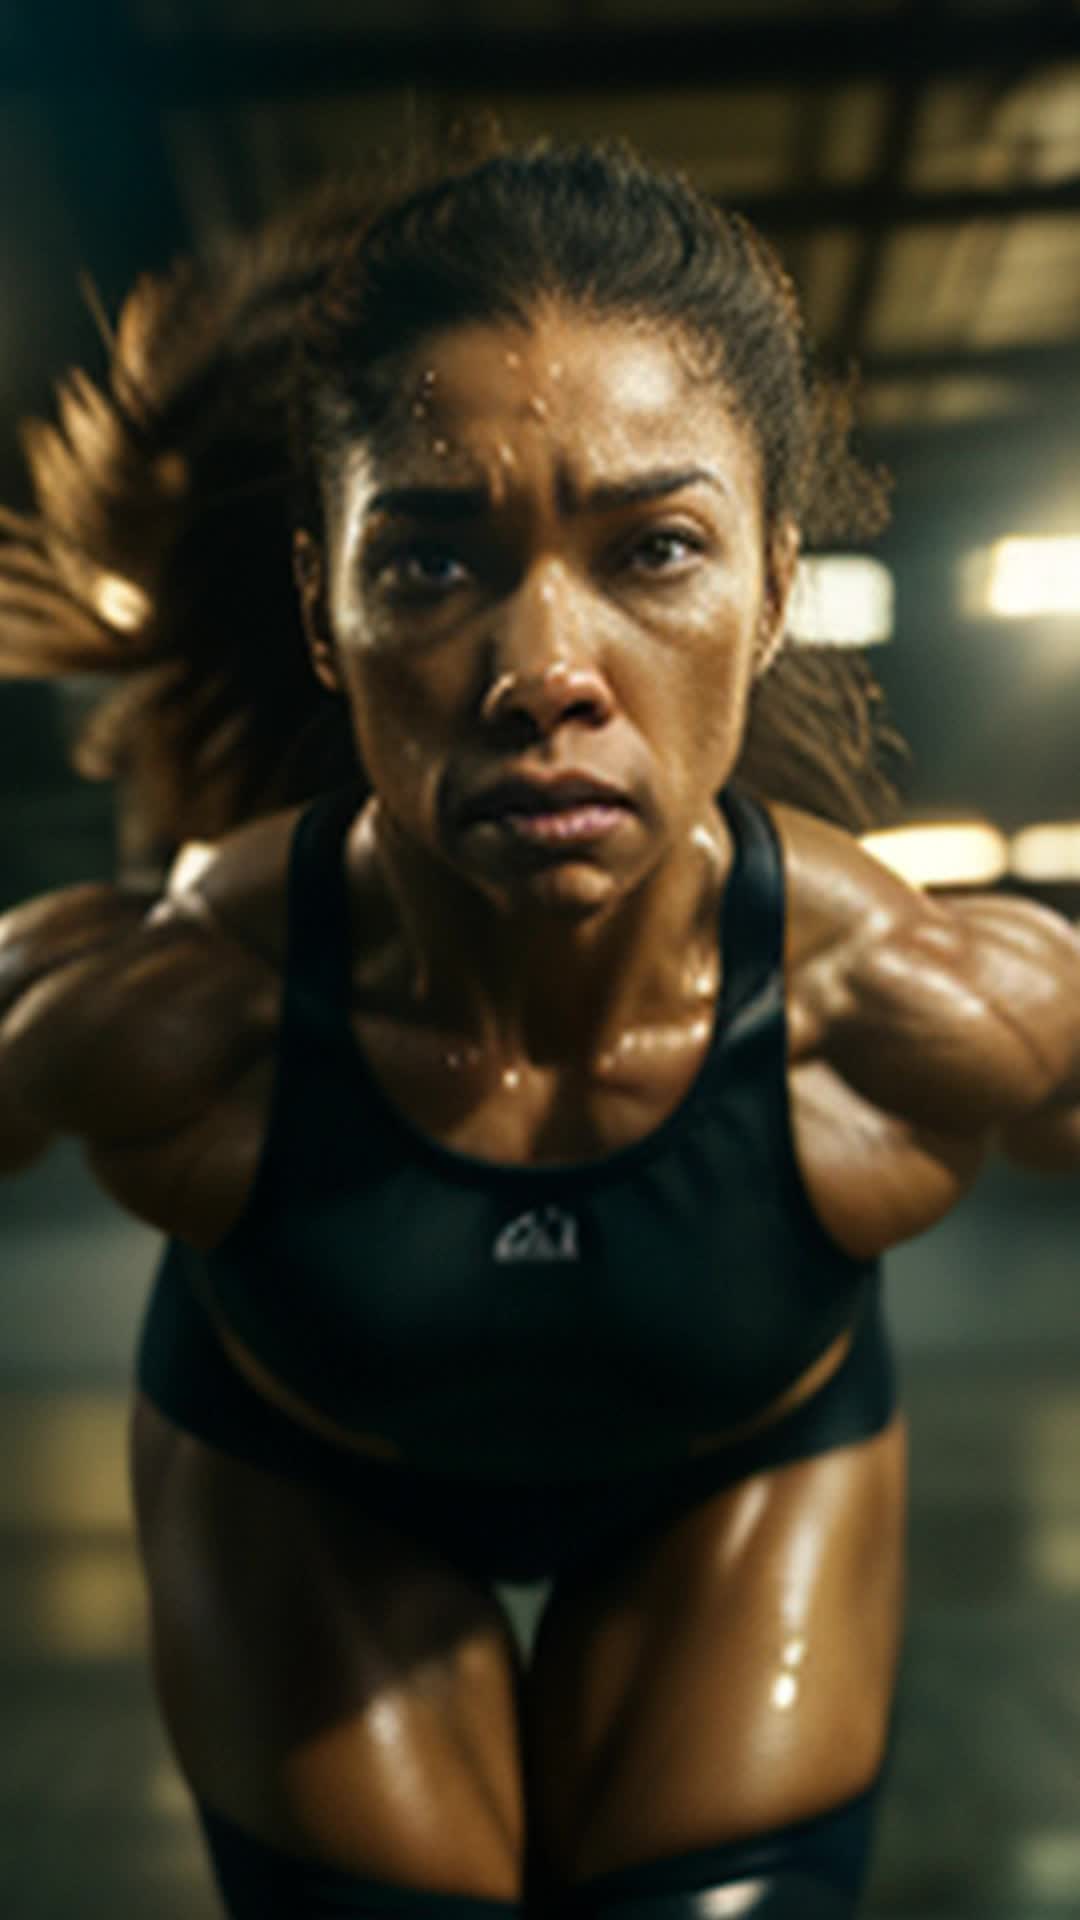 Female athlete in action, pushing limits, deep breaths, sweat glistening, determination, gritty gym backdrop, old equipment, dynamic motion, muscles tensing, energy fueled by memories of past glories